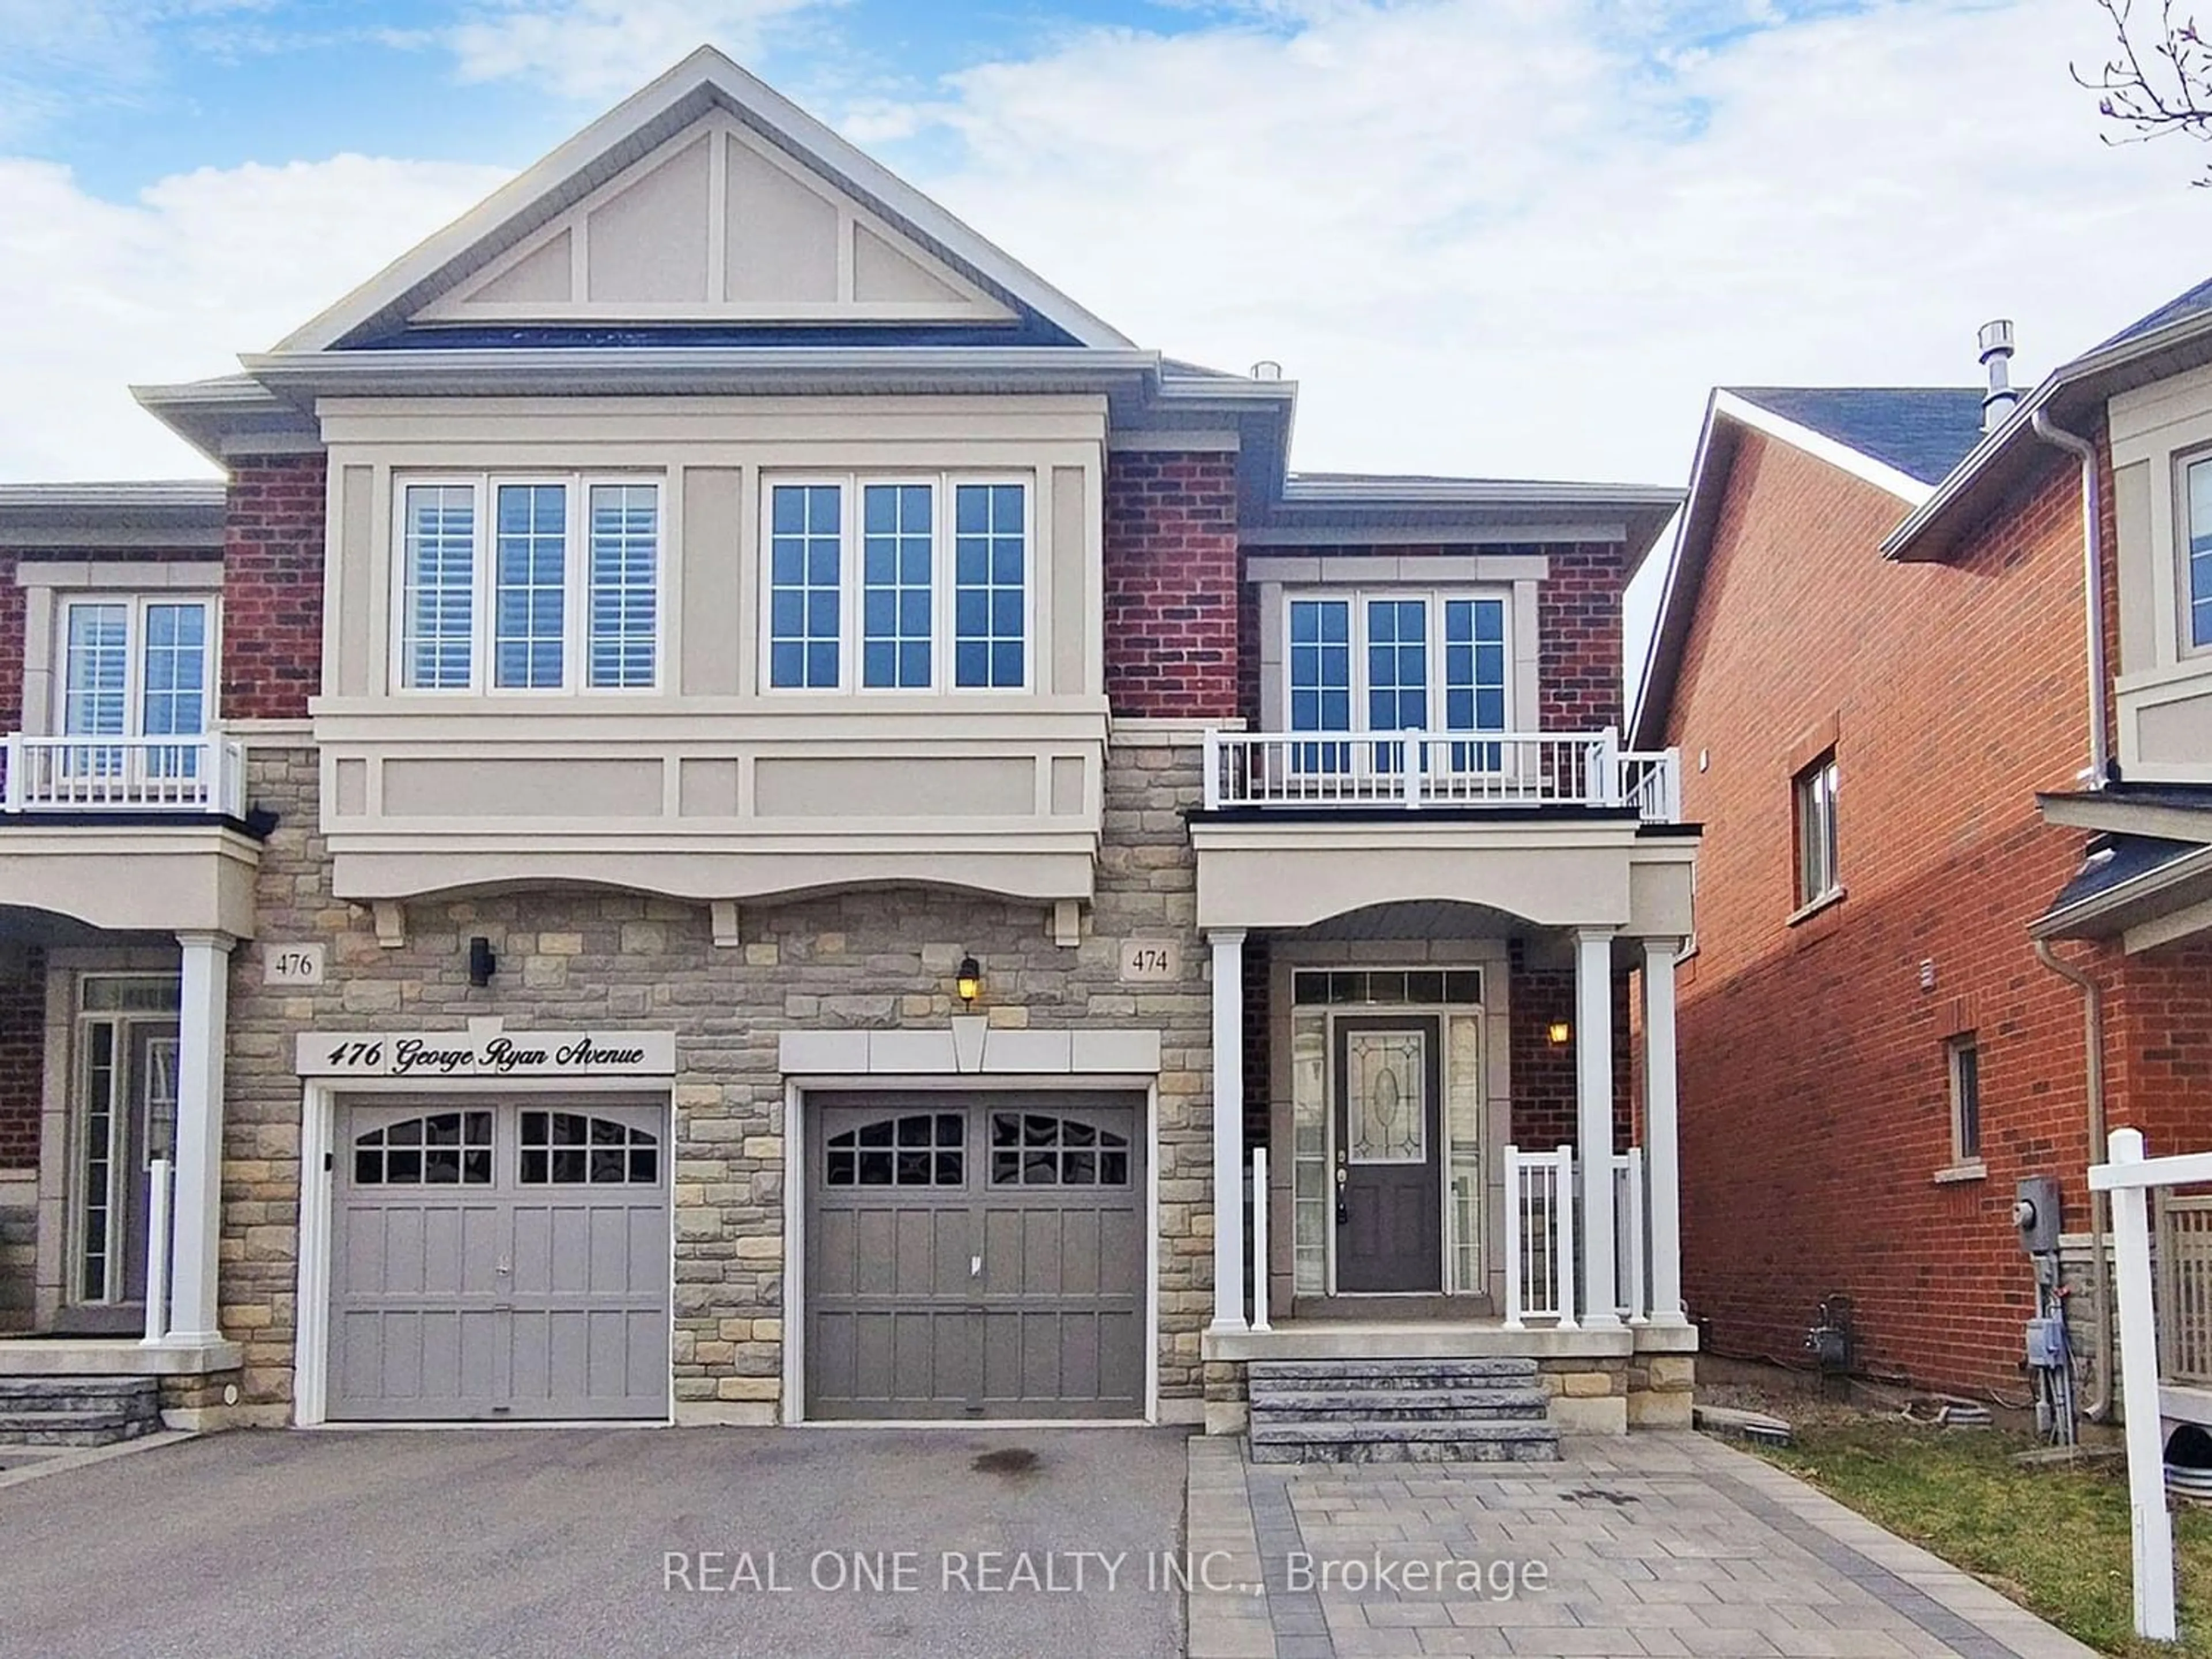 Home with brick exterior material for 474 George Ryan Ave, Oakville Ontario L6H 7H5